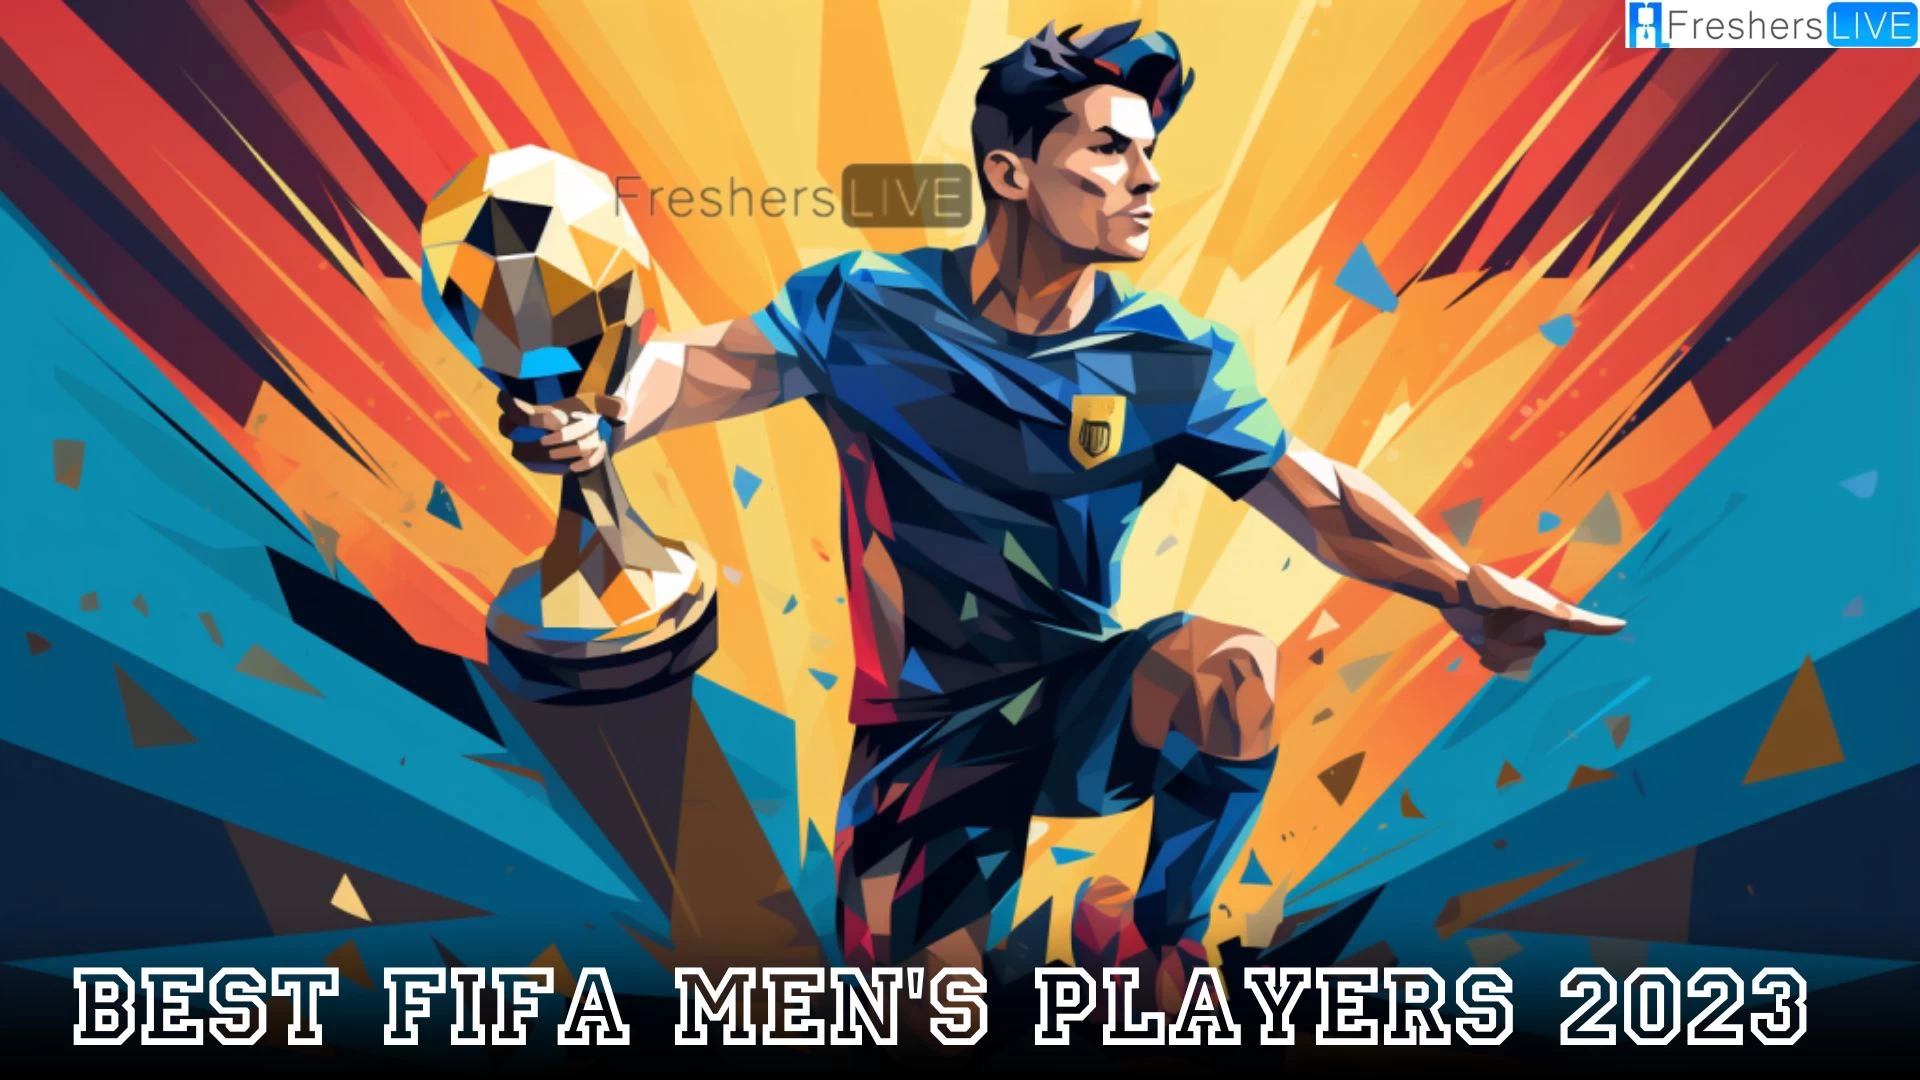 Best FIFA Men's Players 2023 - Shaping Legends in Football